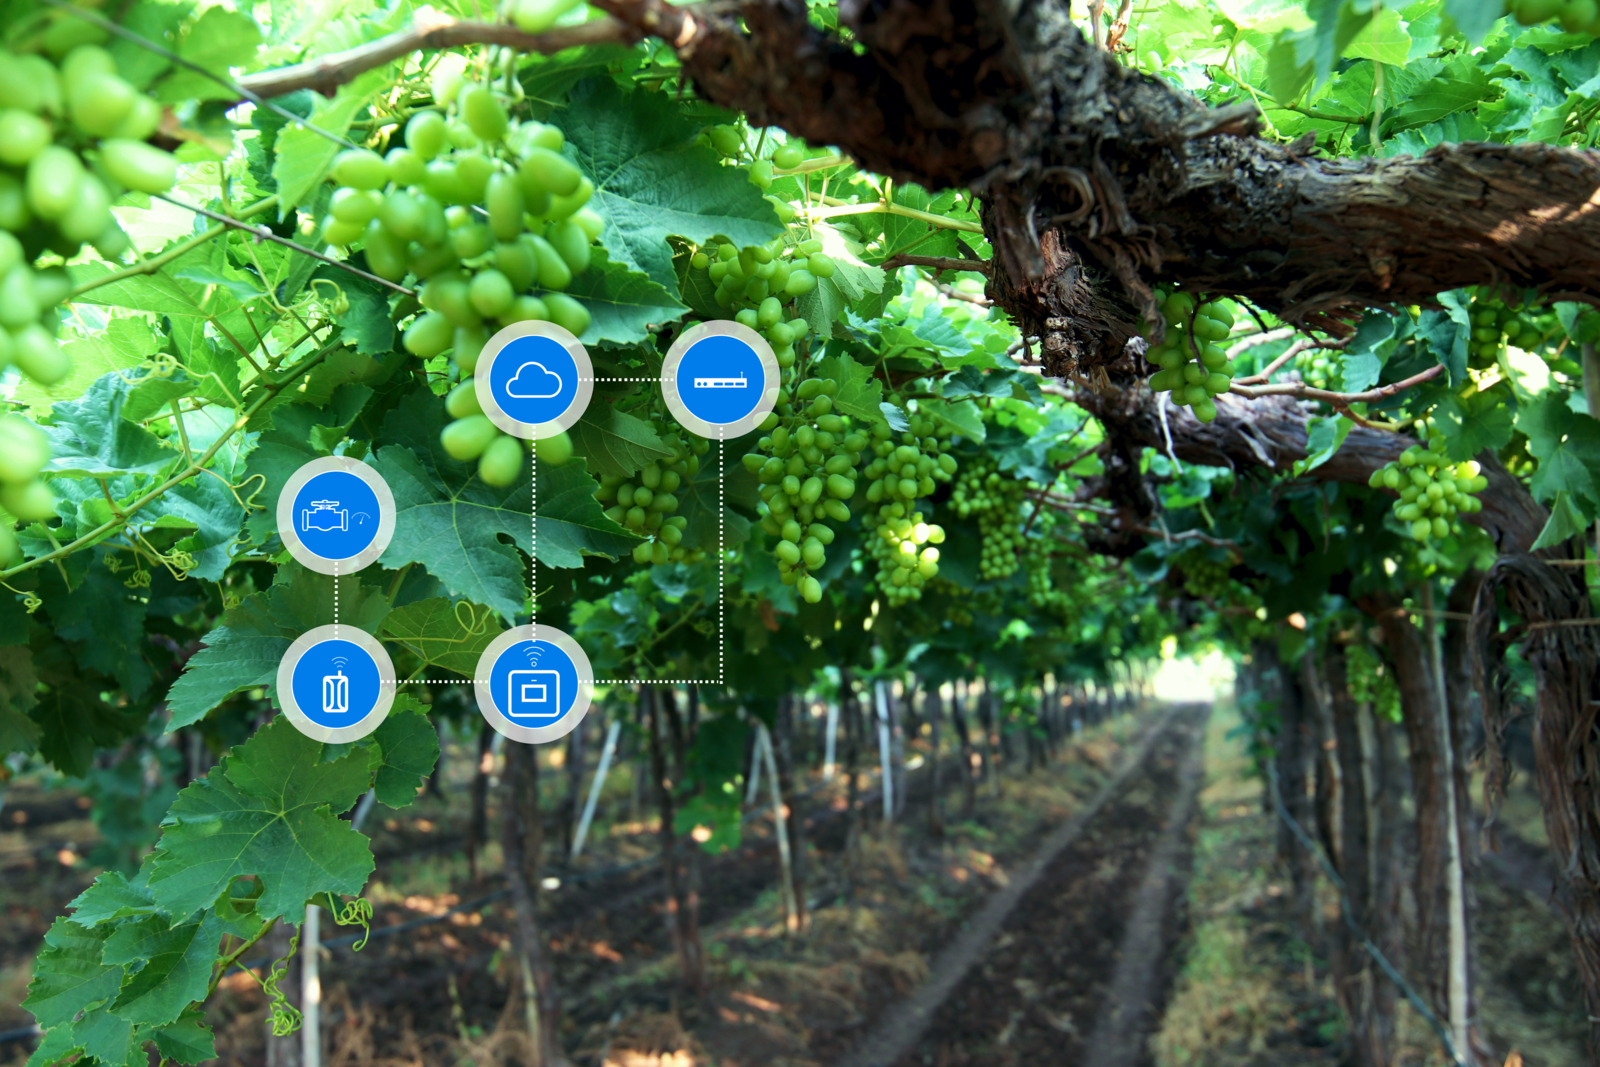 Enrich your orchards with our digital solutions